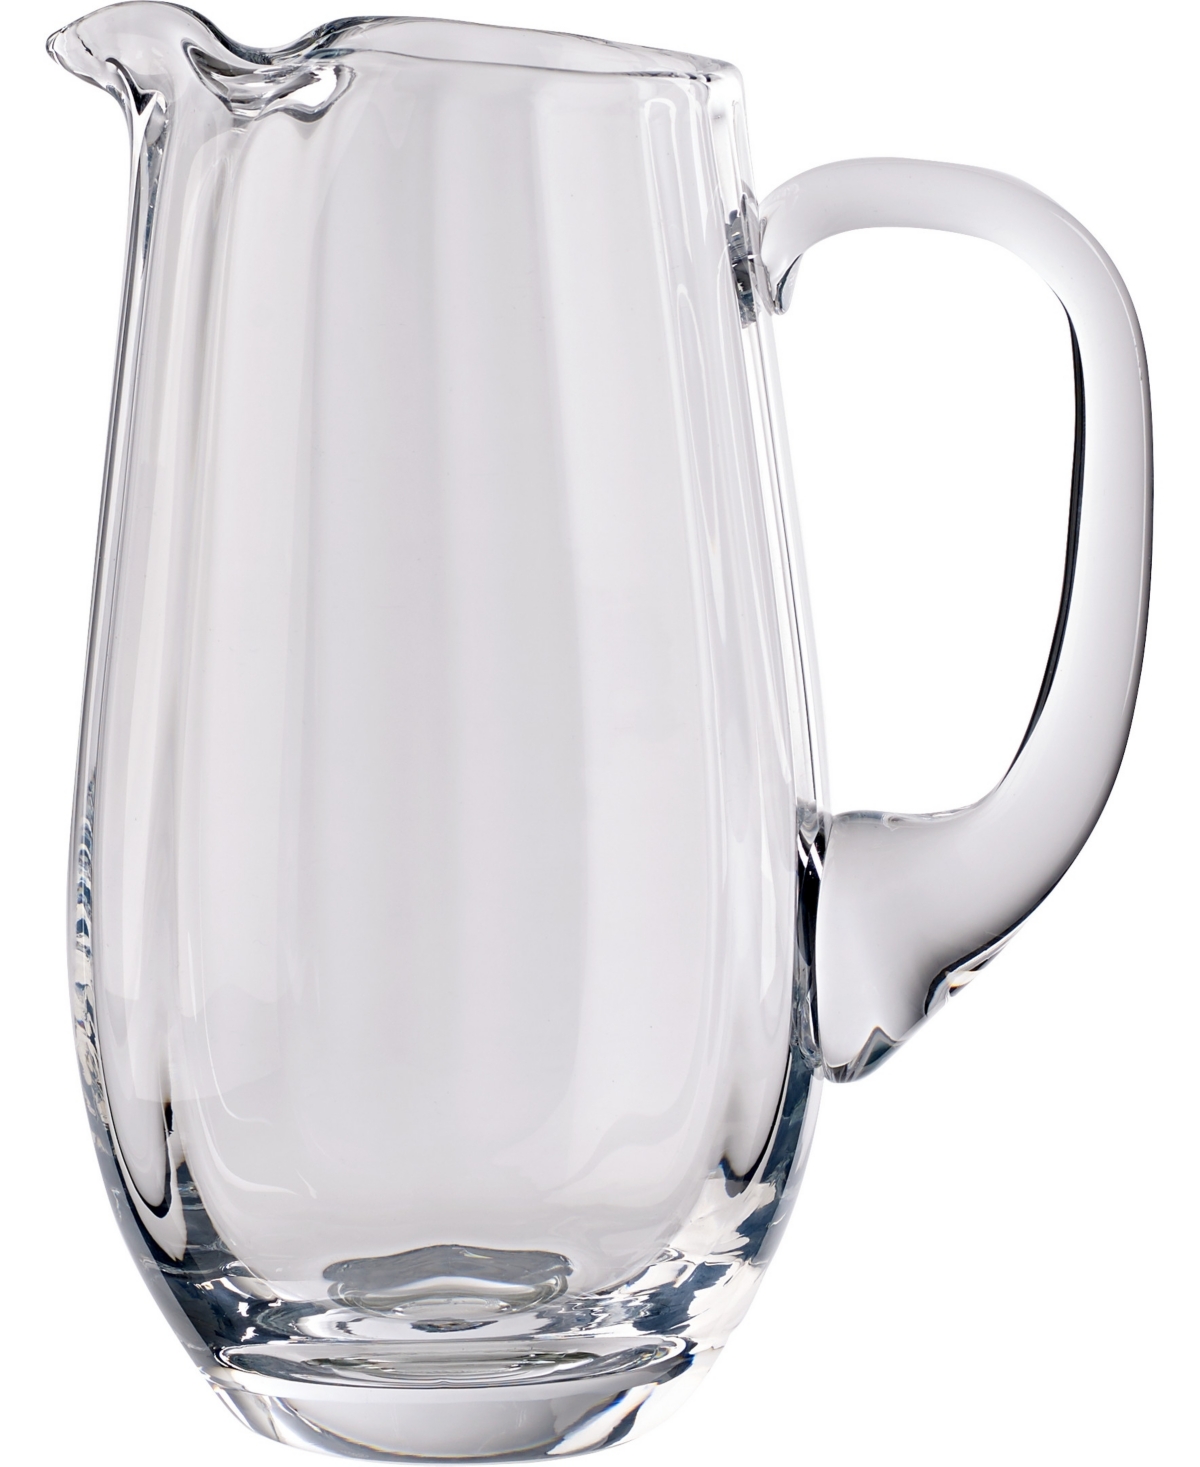 Villeroy & Boch Rose Garden Crystal Collection Pitcher In Clear